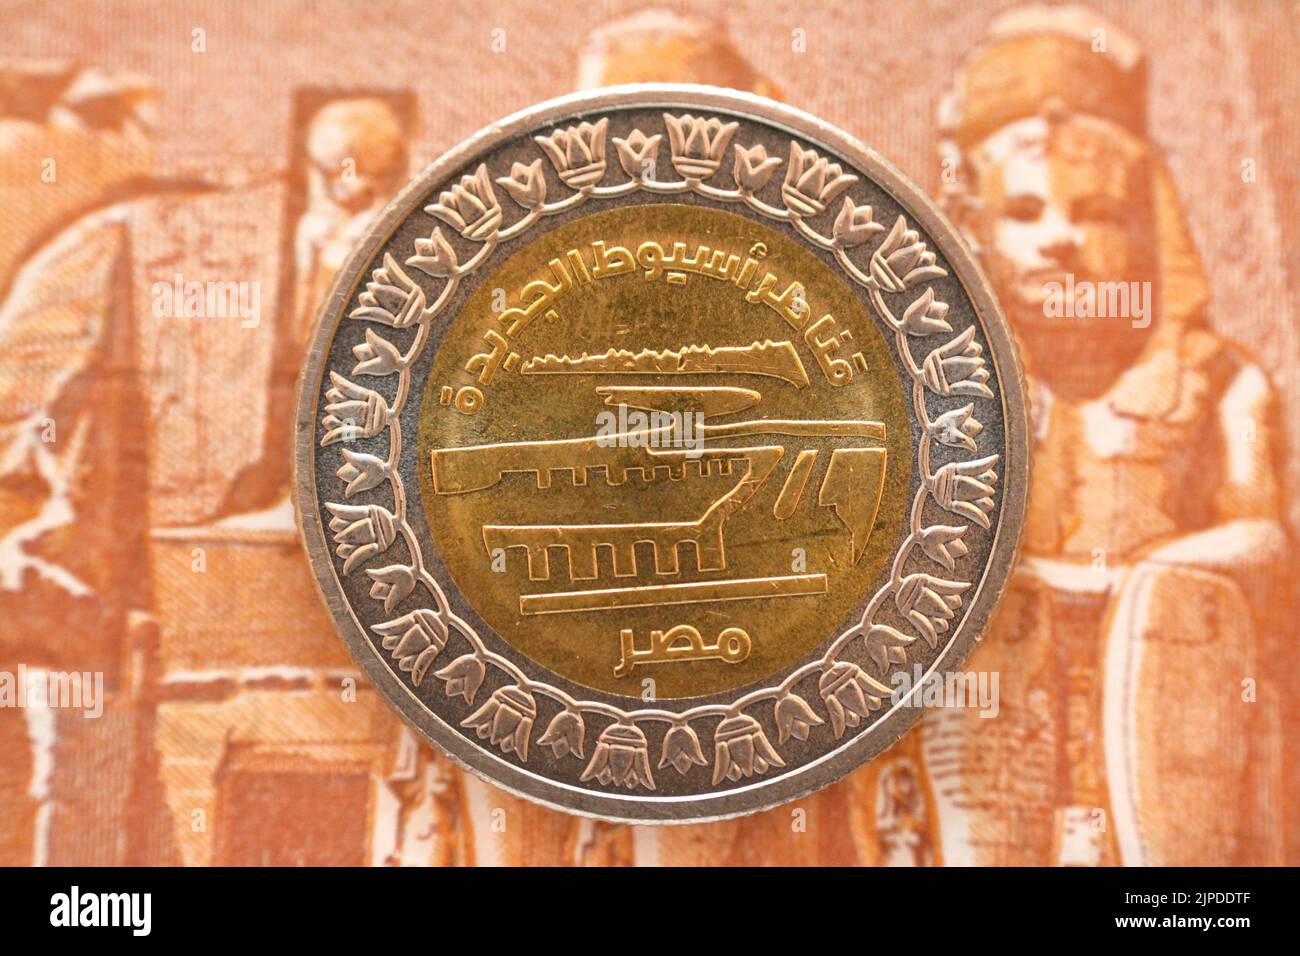 New Asyut city barrage project slogan from the obverse side of 1 LE EGP coin one Egyptian pound money on a blurred background of reverse side of one p Stock Photo